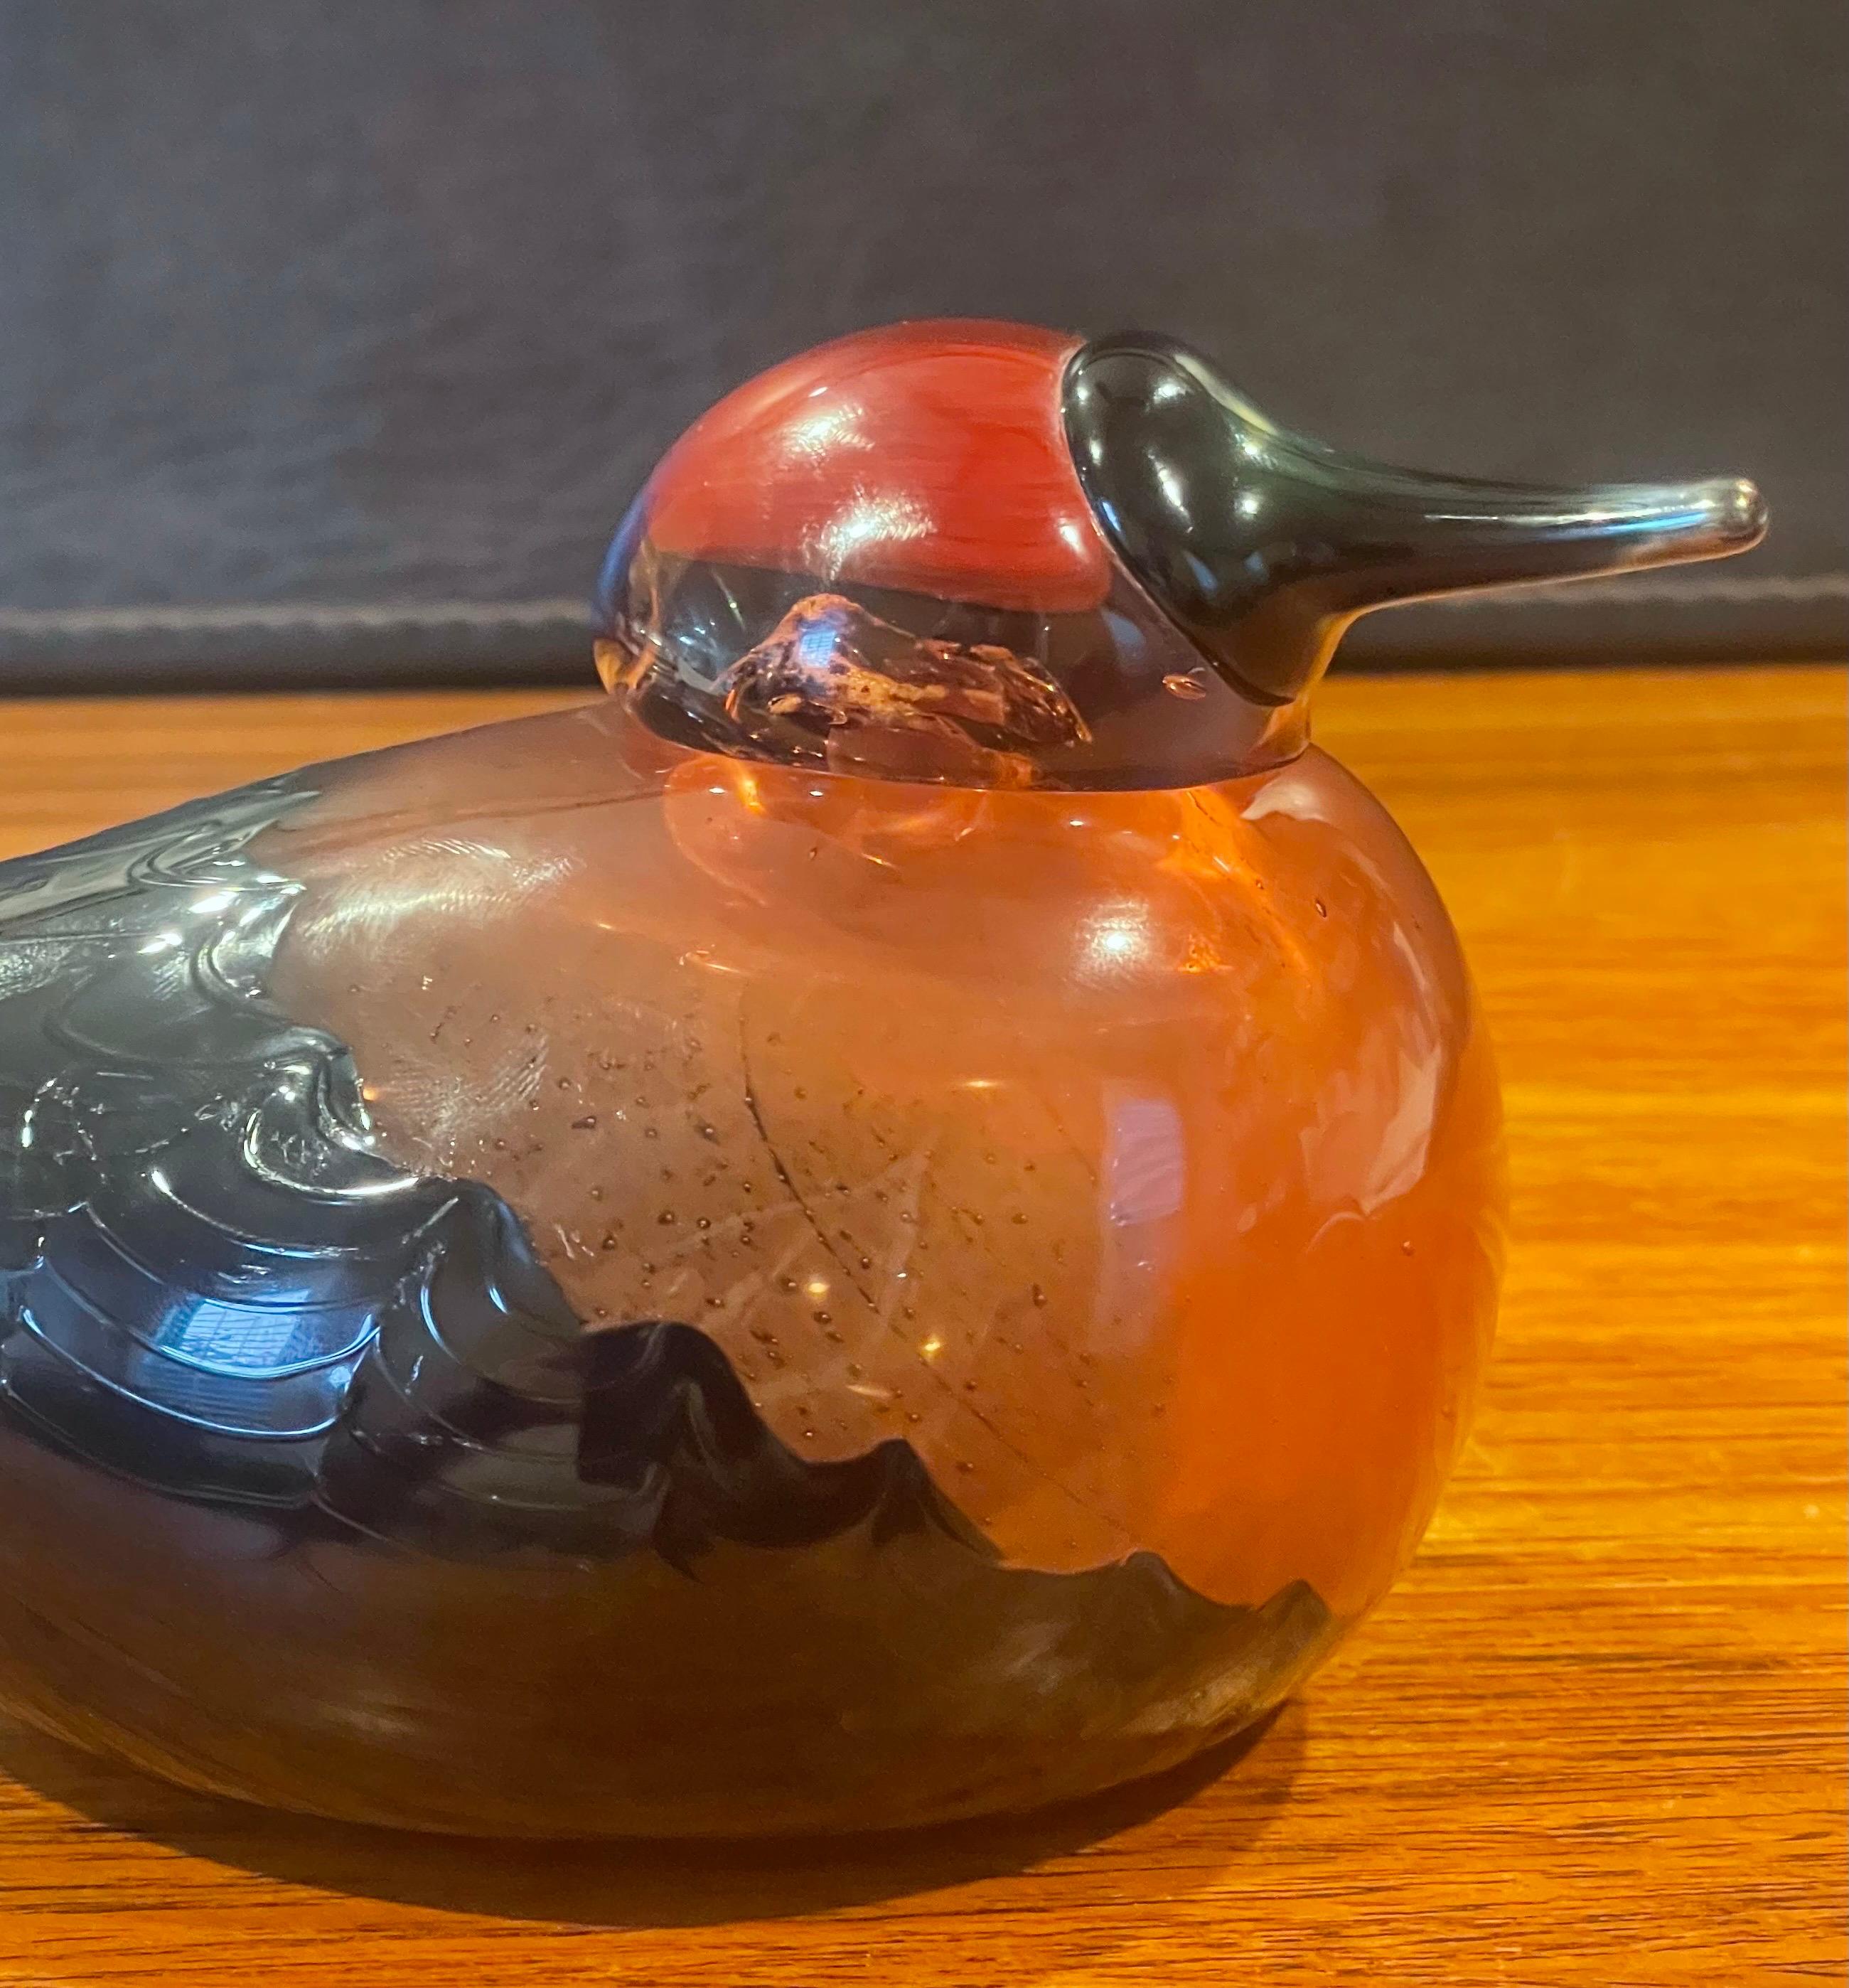 20th Century Limited Edition Art Glass Bird Sculpture by Oiva Toikka for Iittala of Finland For Sale